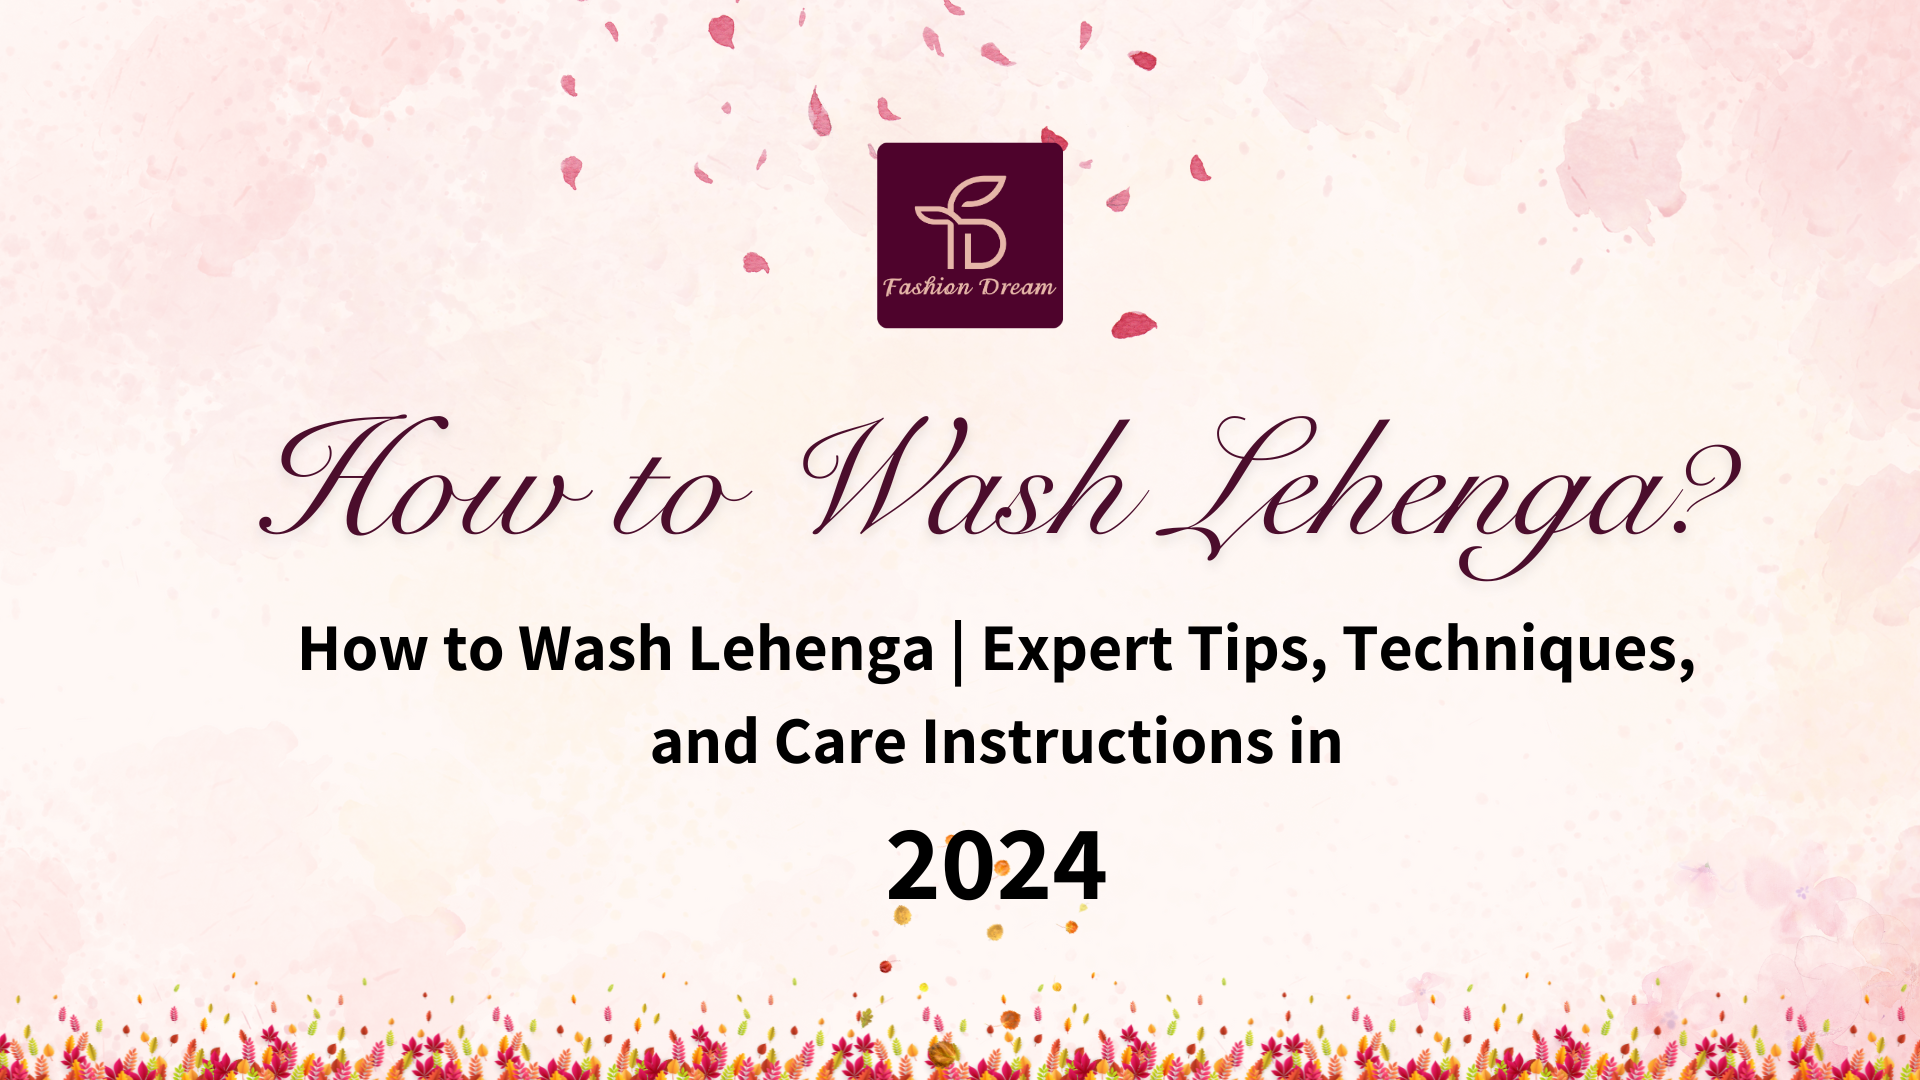 How to Wash Lehenga | Expert Tips, Techniques, and Care Instructions in 2024